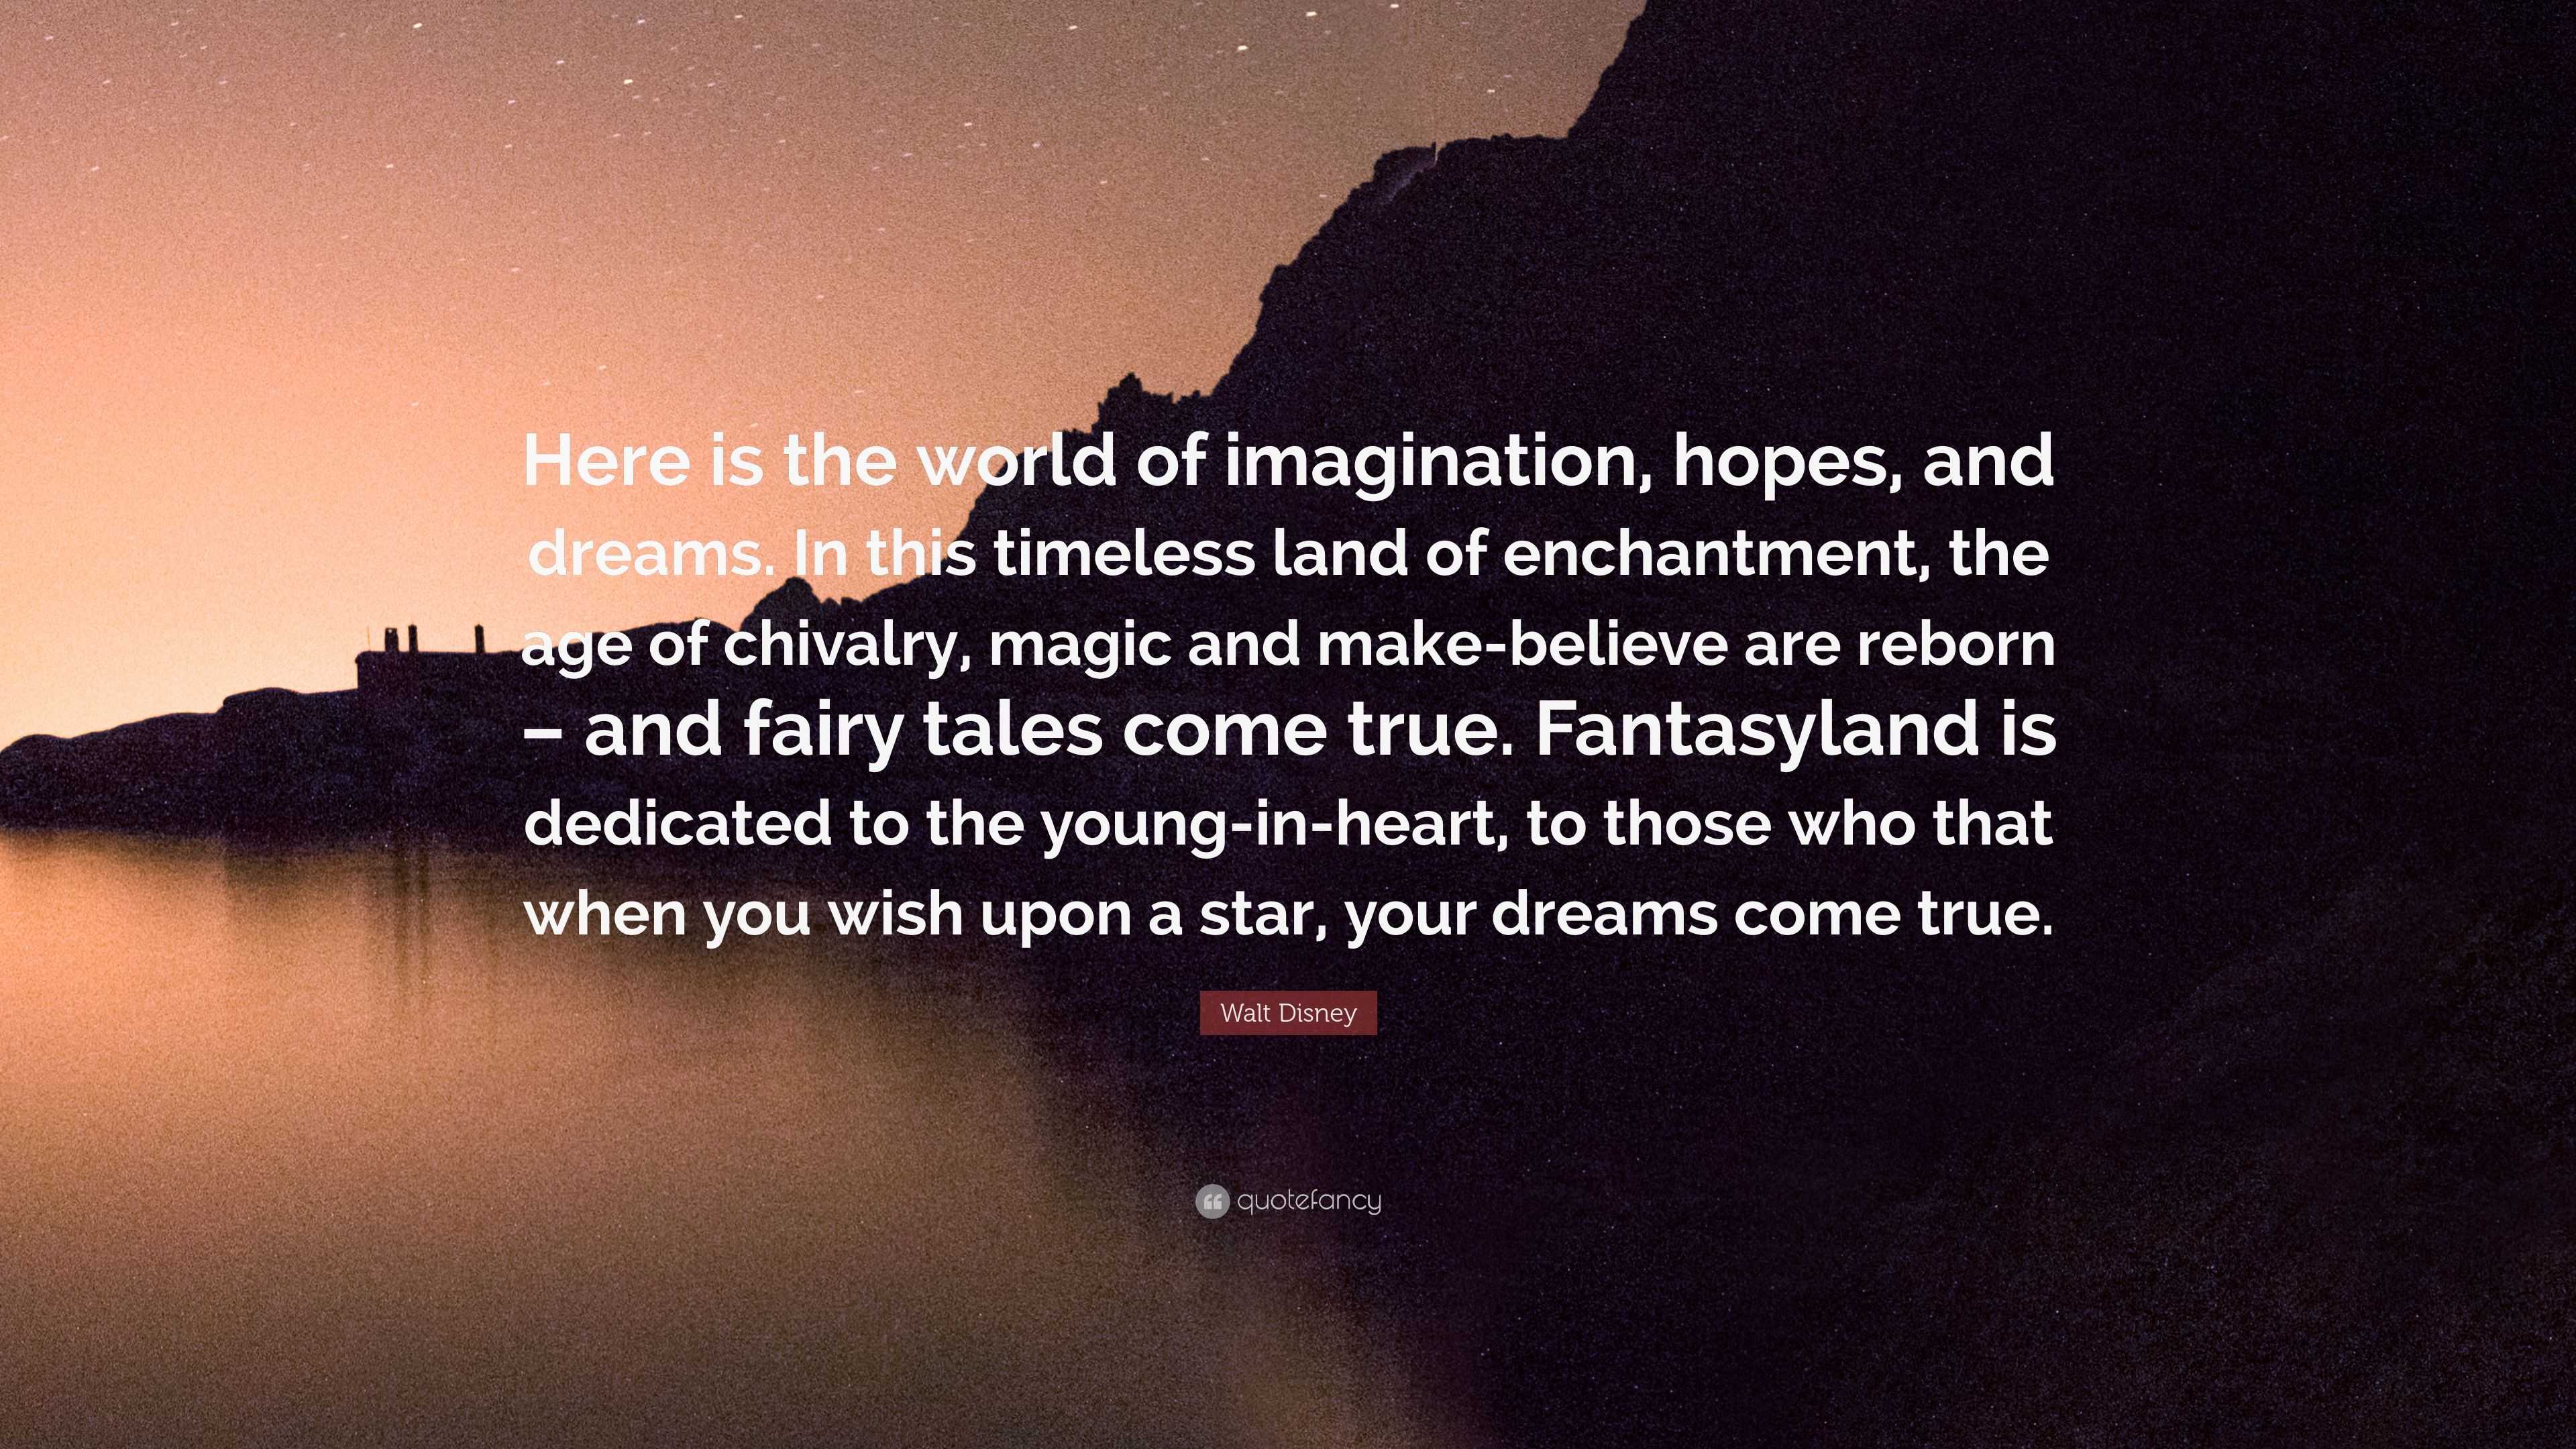 Walt Disney Quote: “Here is the world of imagination, hopes, and dreams